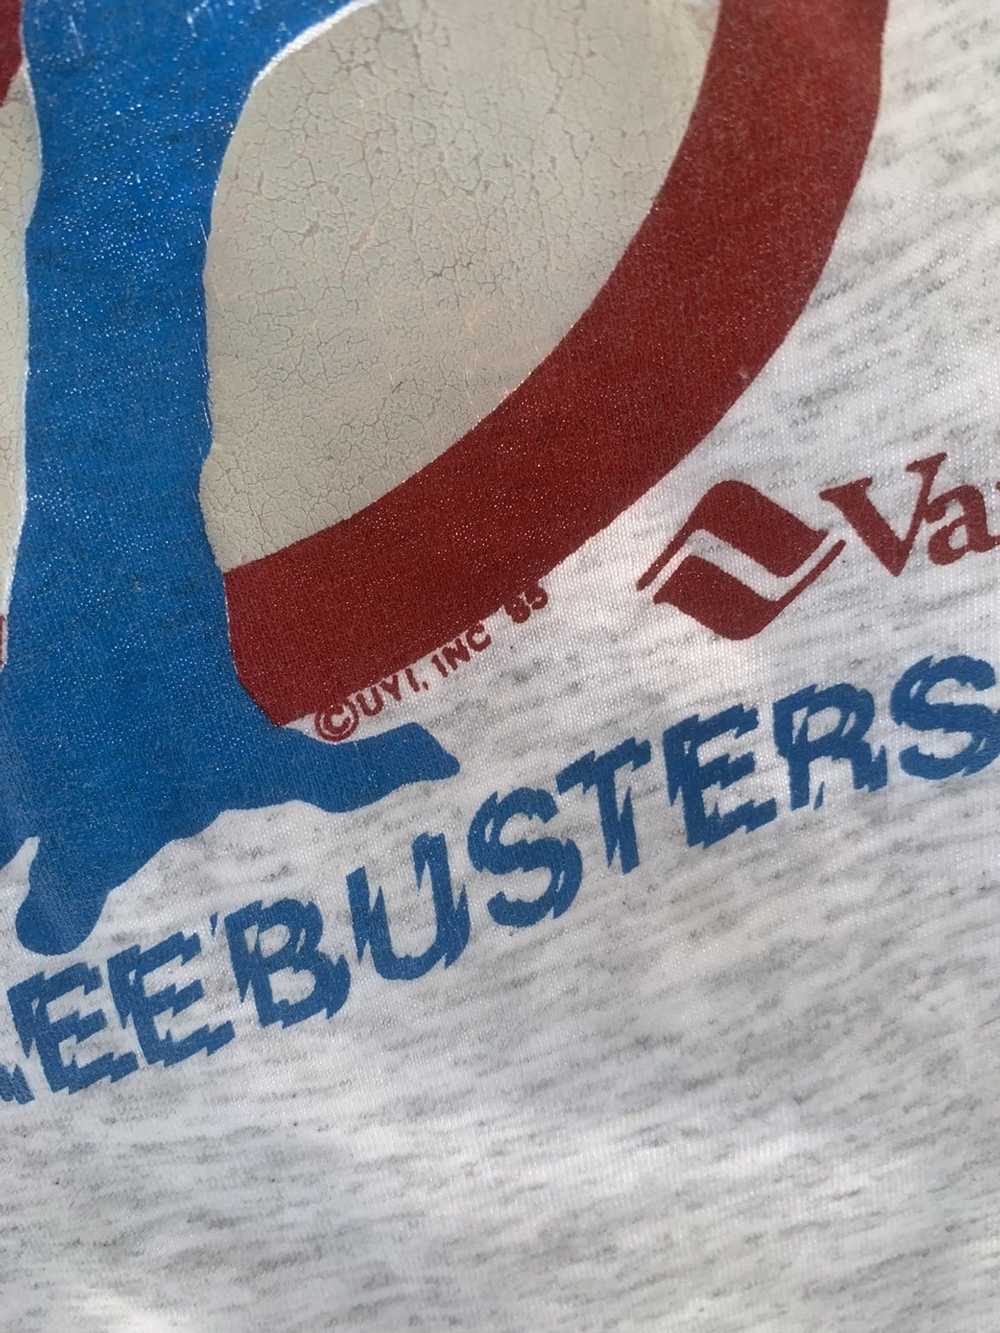 Vintage Ghost Busters T-Shirt - image 3